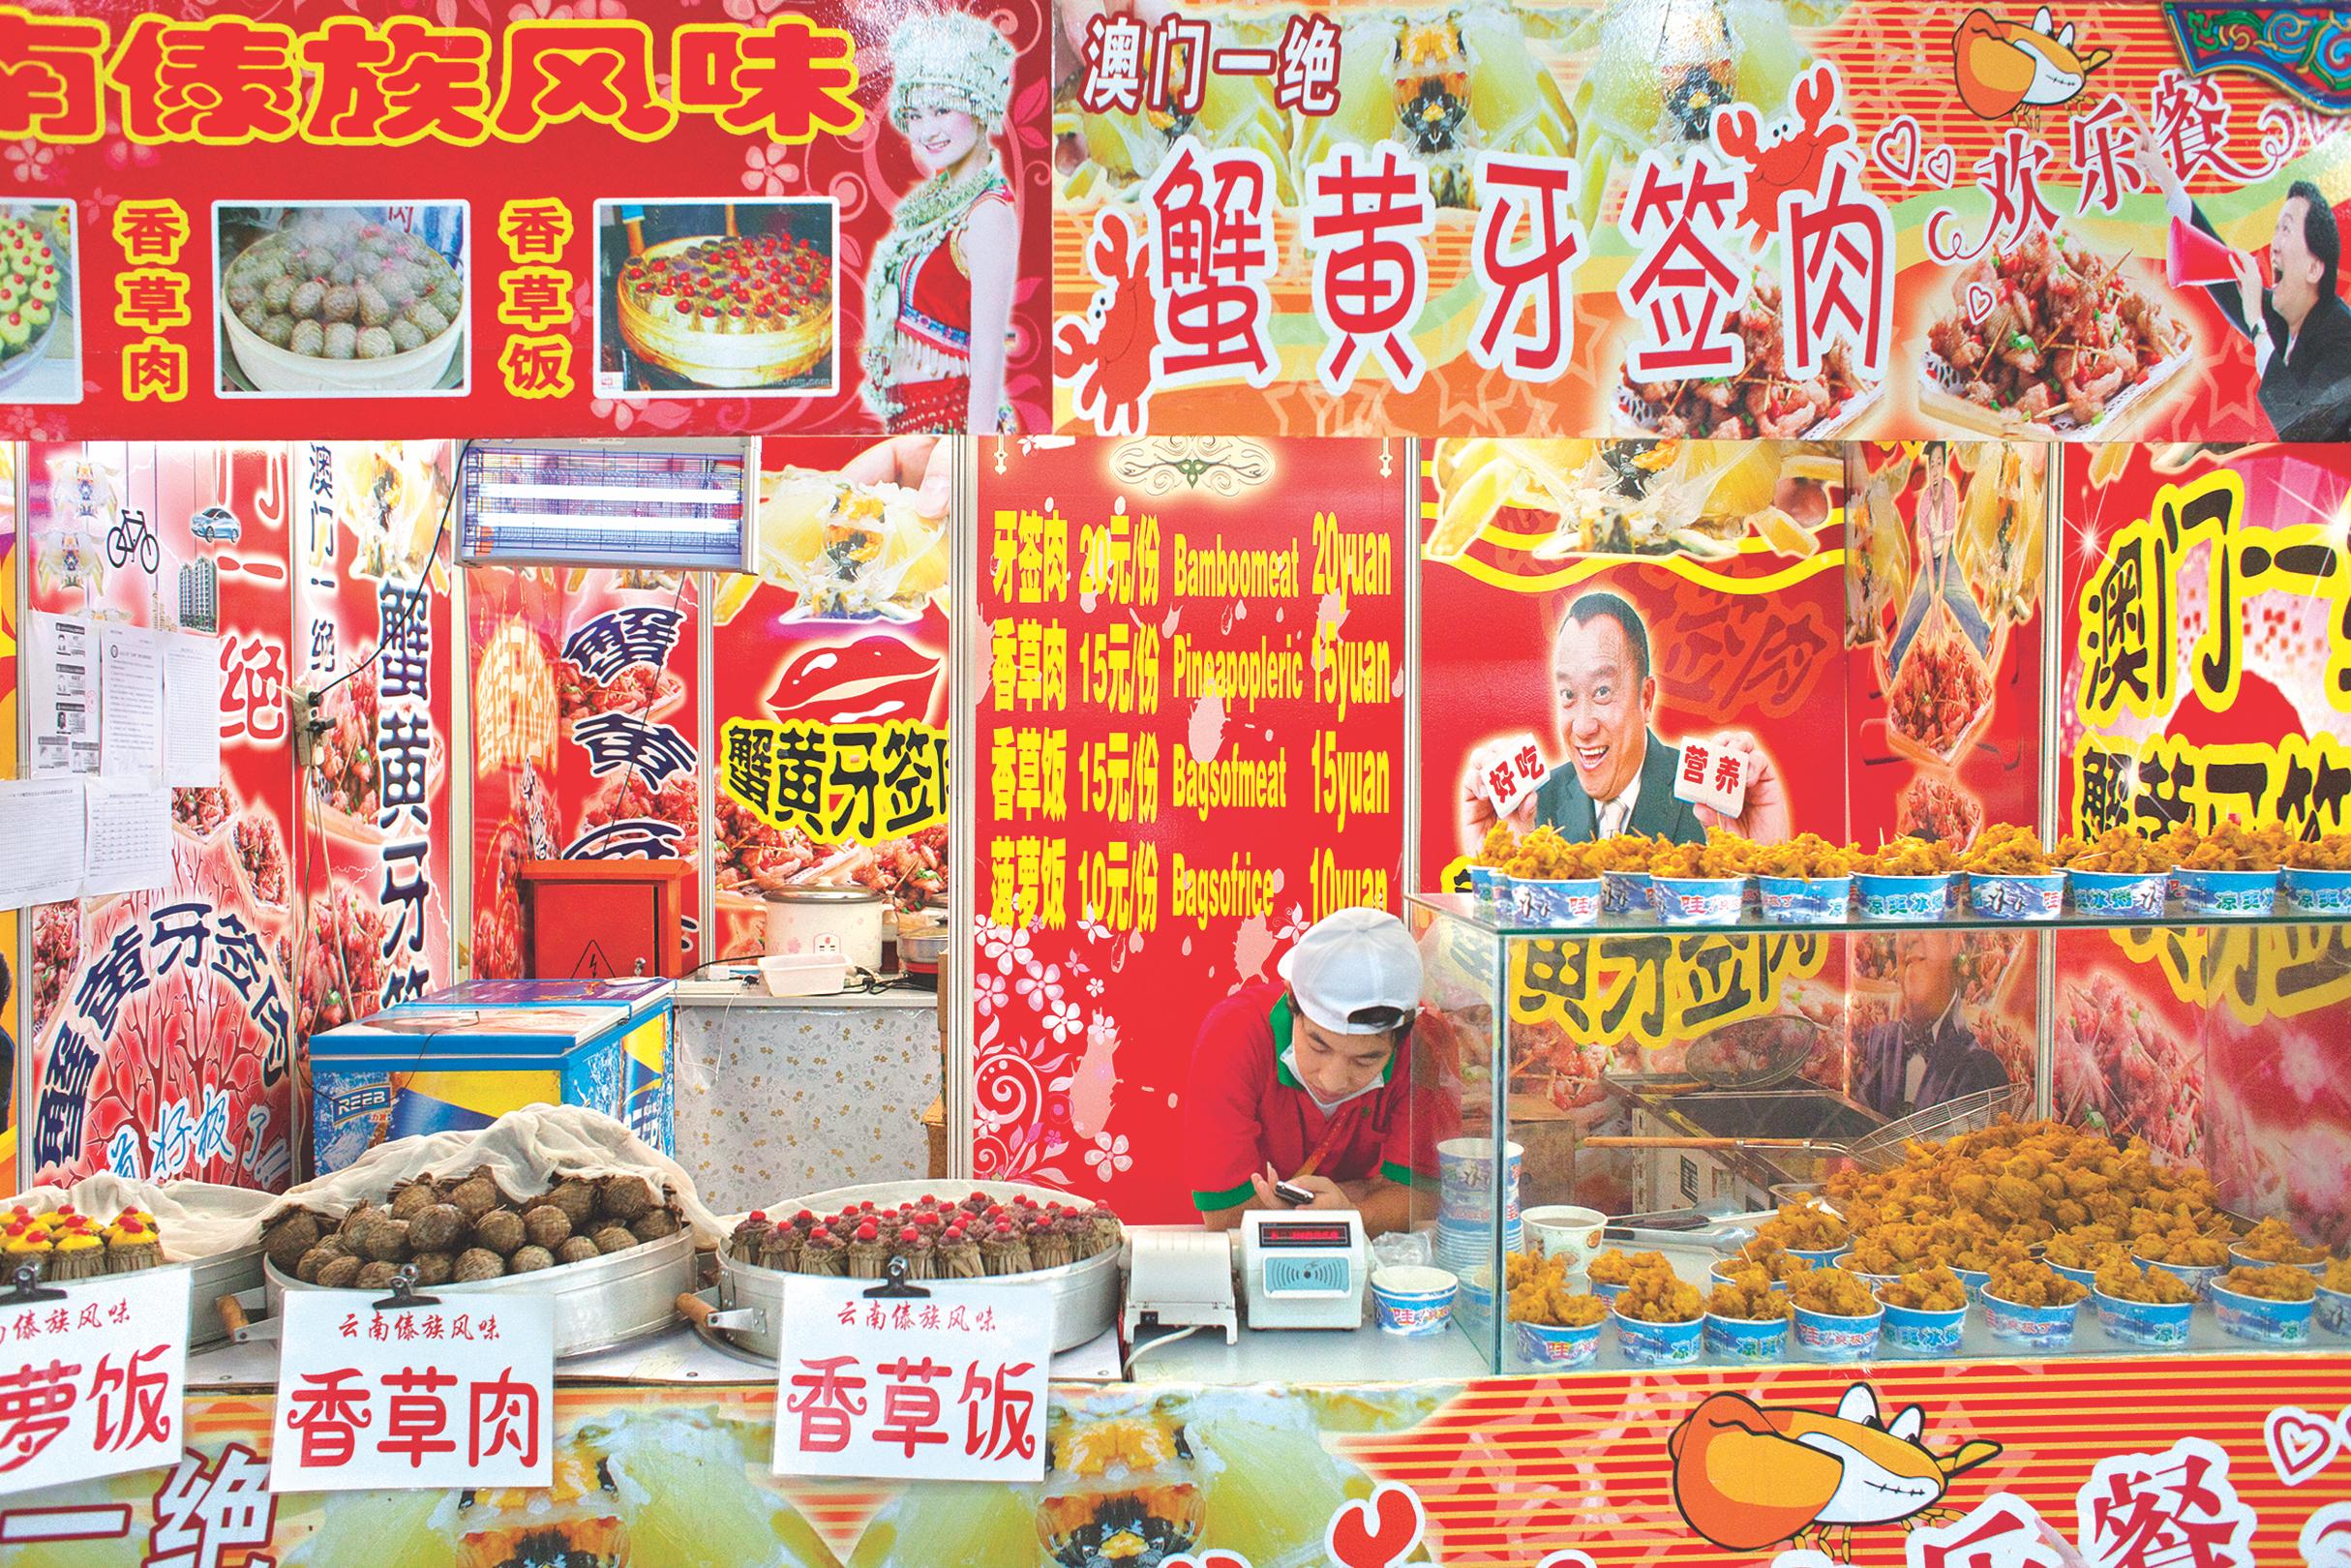 Anja Hitzenberger Color Photograph - Chinese Fast Food 1 (aka Red) - Contemporary Color Food Photography 